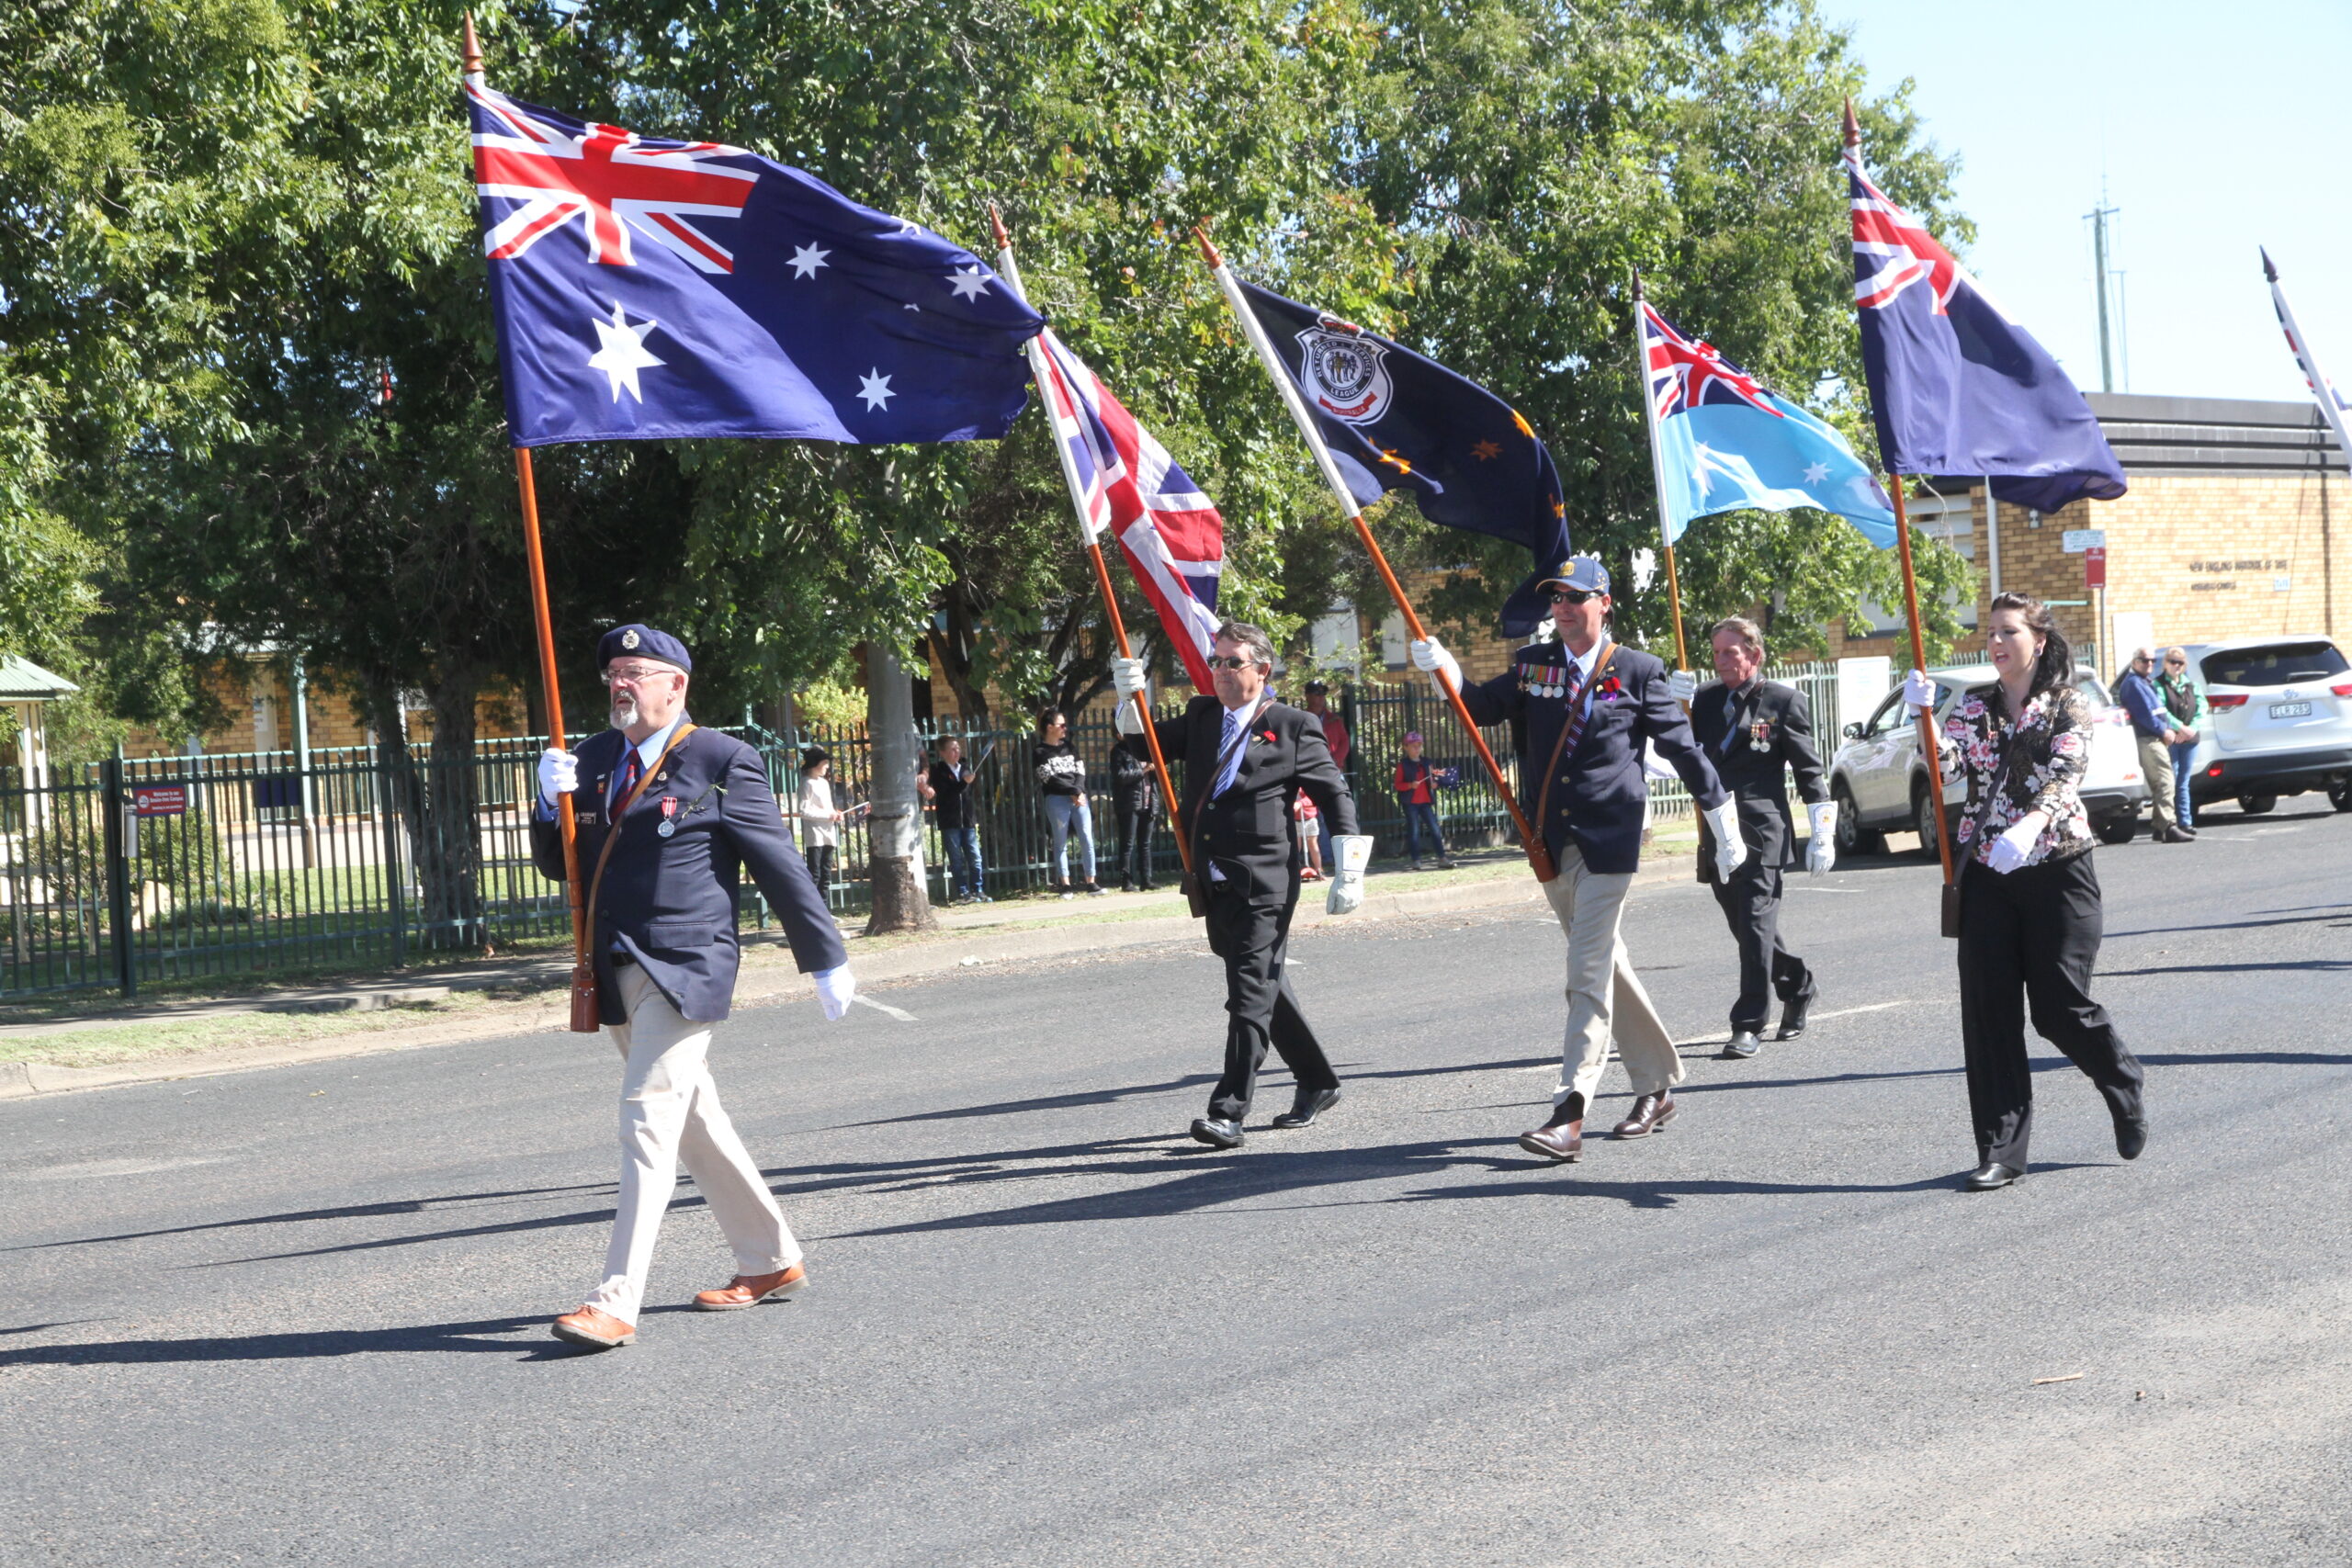 The march sets off led by Graham Thomas, Michael Peterson, Scott McCarron, Jacinta Peate and back, David Peate.